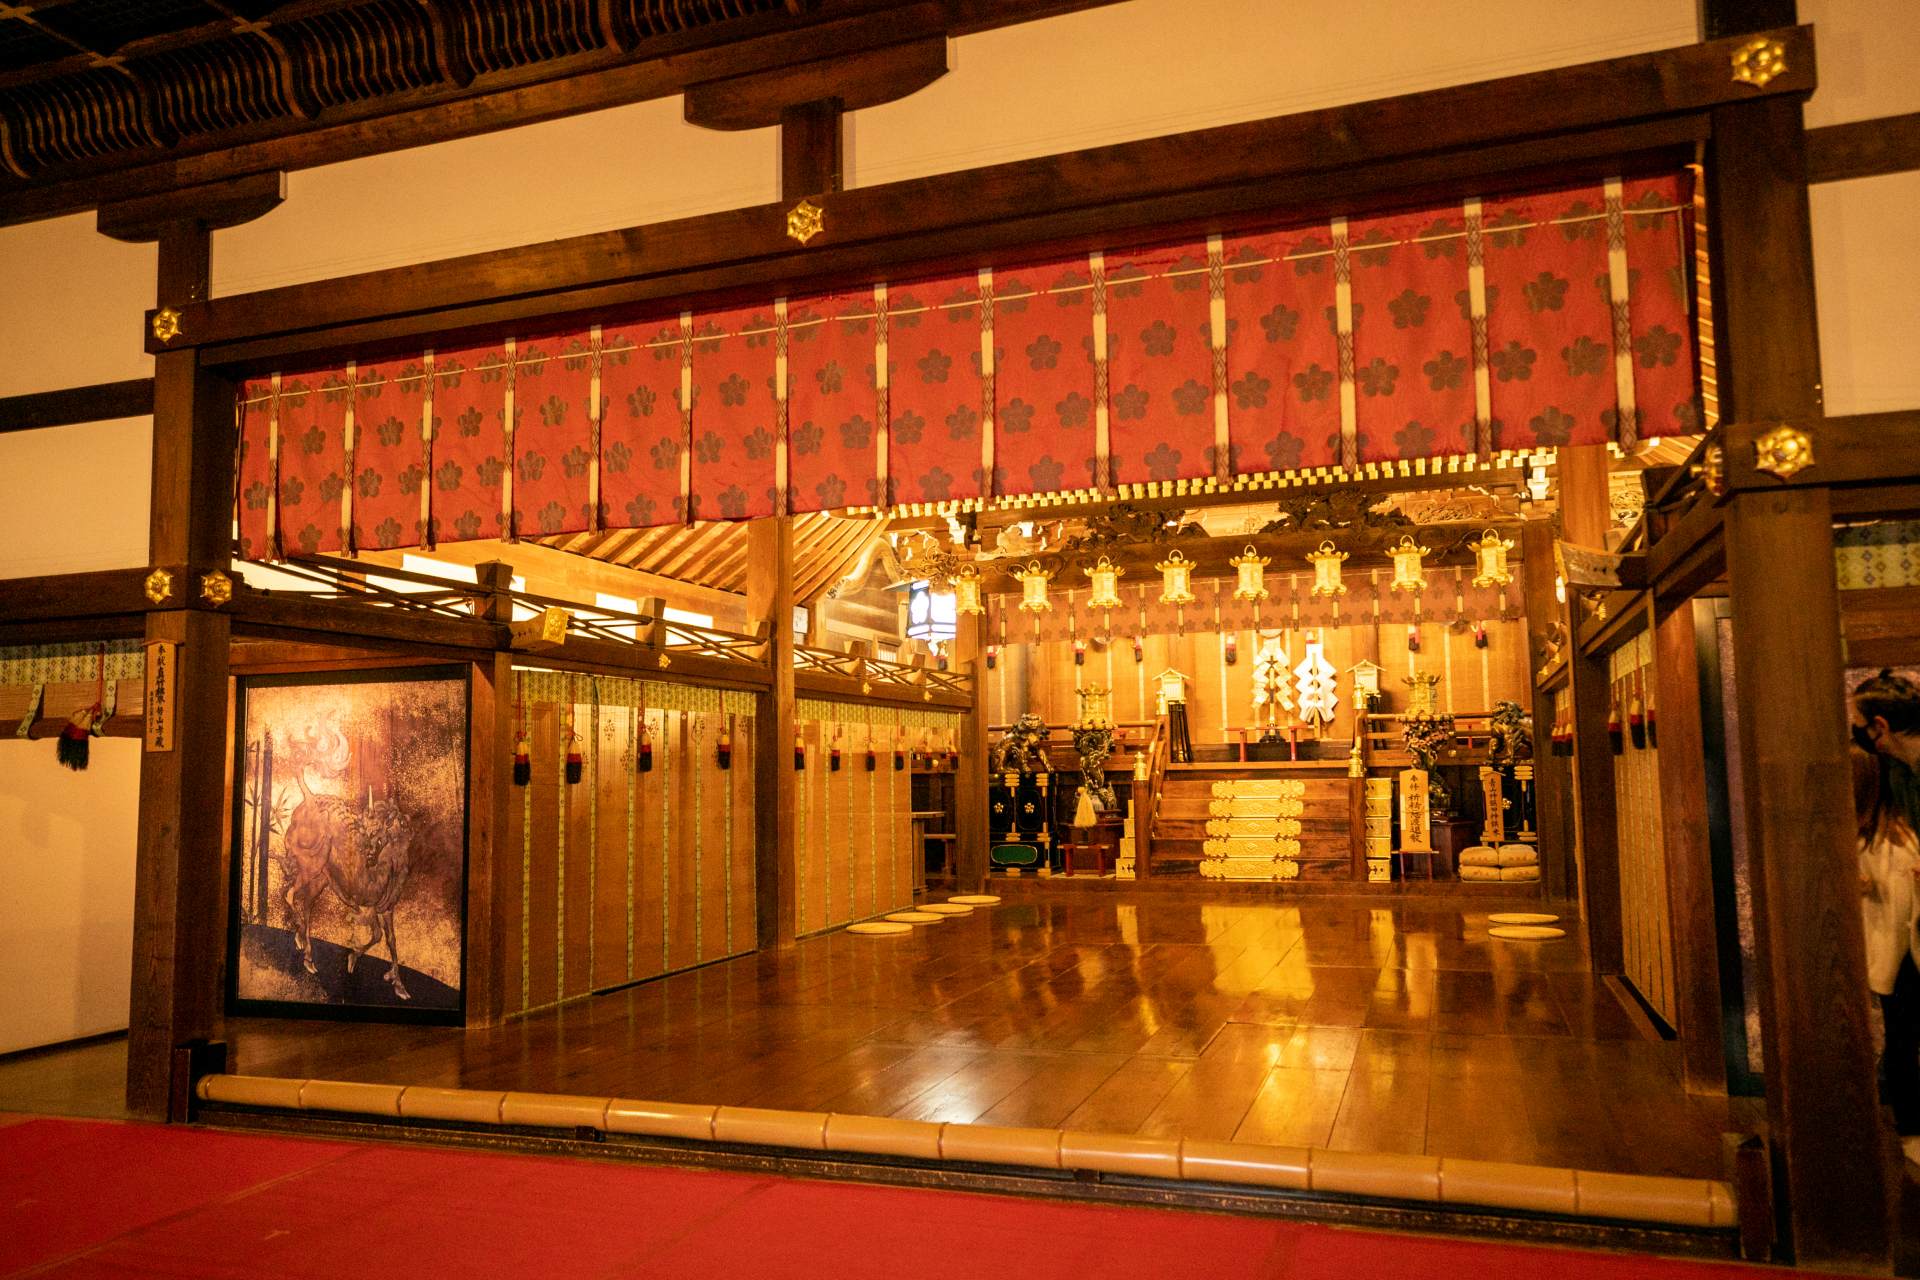 The main shrine building has an exquisite and sacred atmosphere. Beyond the low bamboo partition is the stage where Noh performers will present the private performance. 